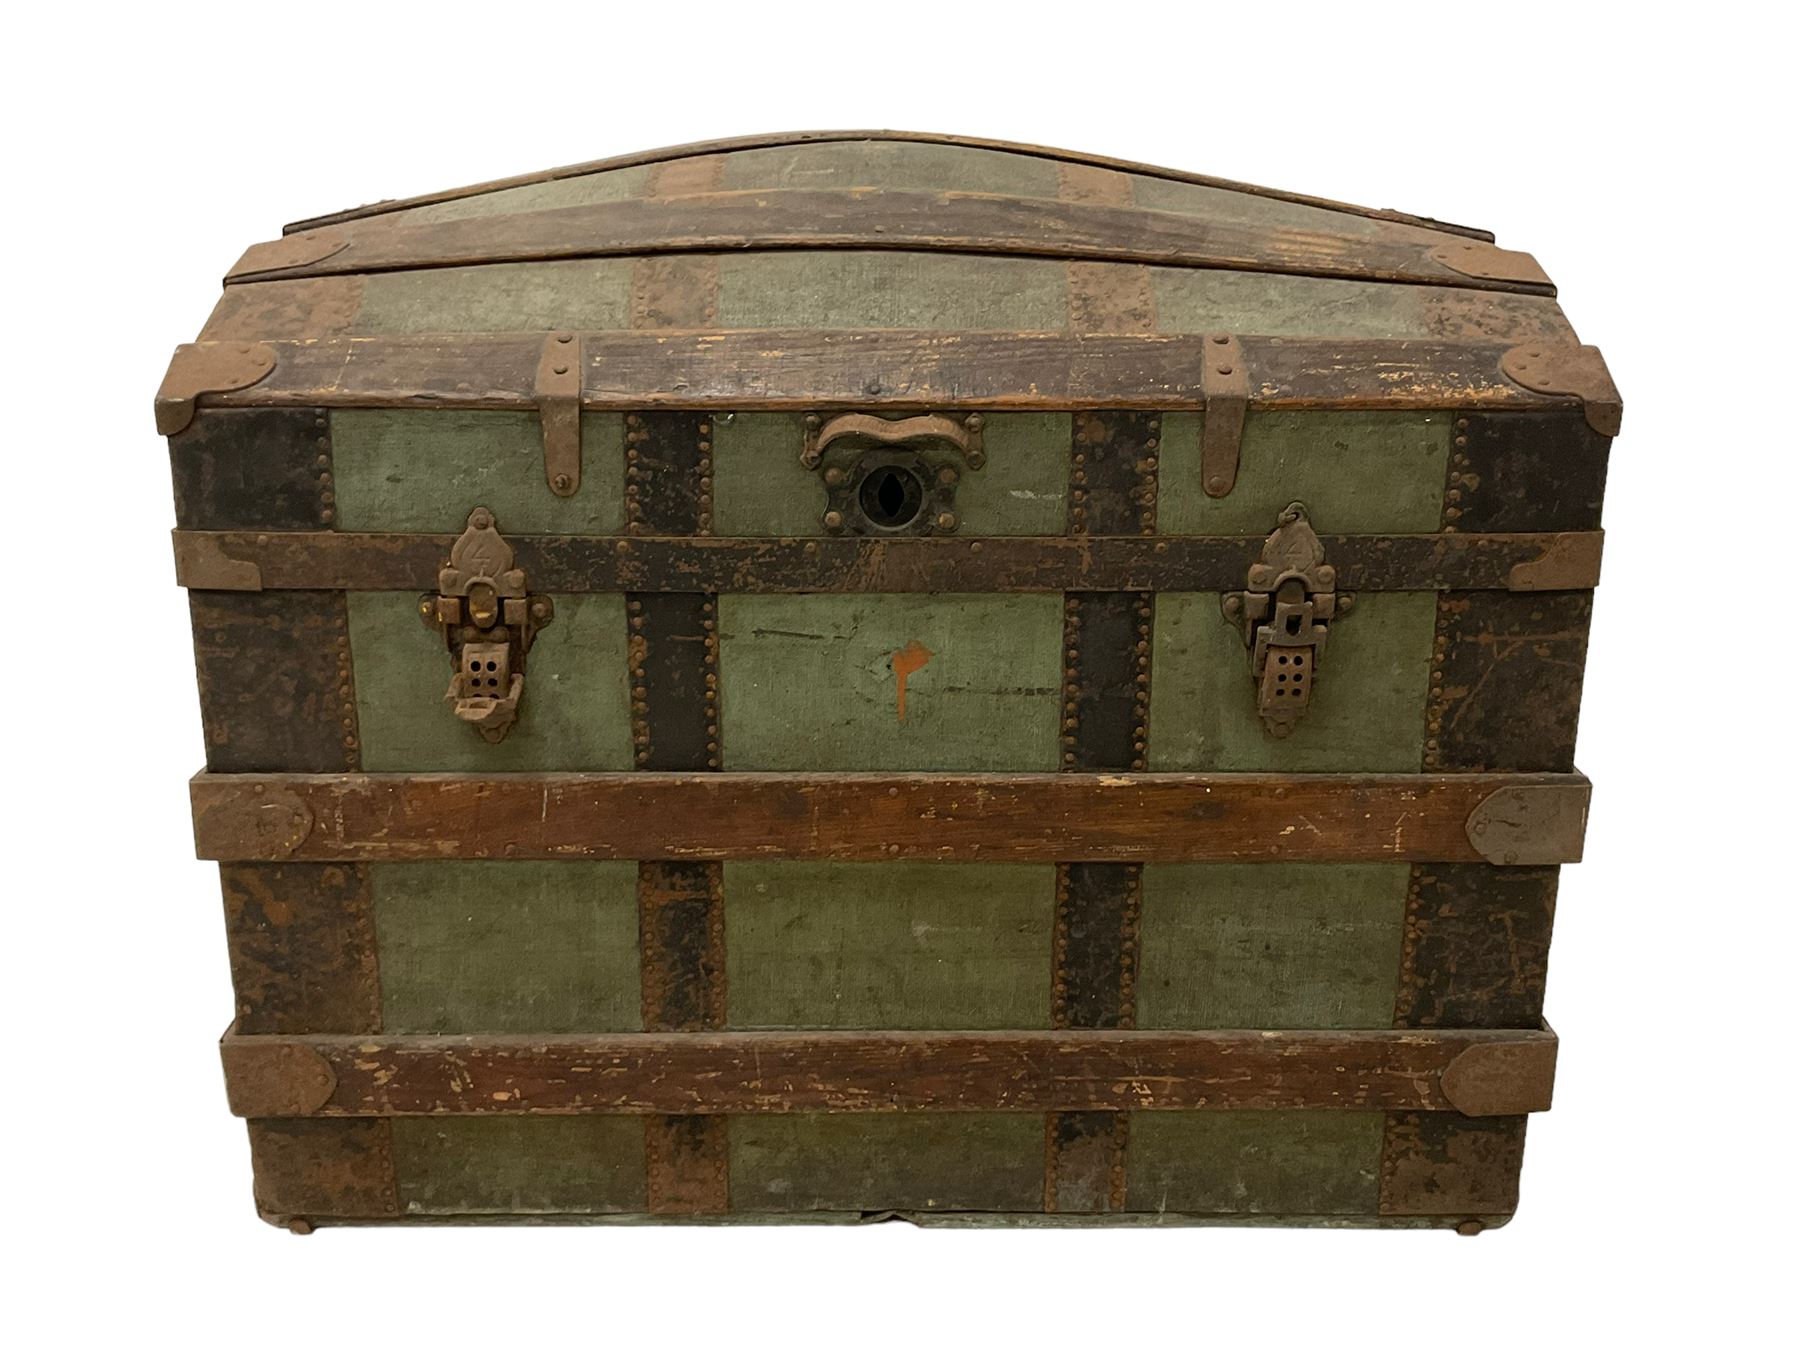 Late 19th century wood and metal bound dome-top trunk